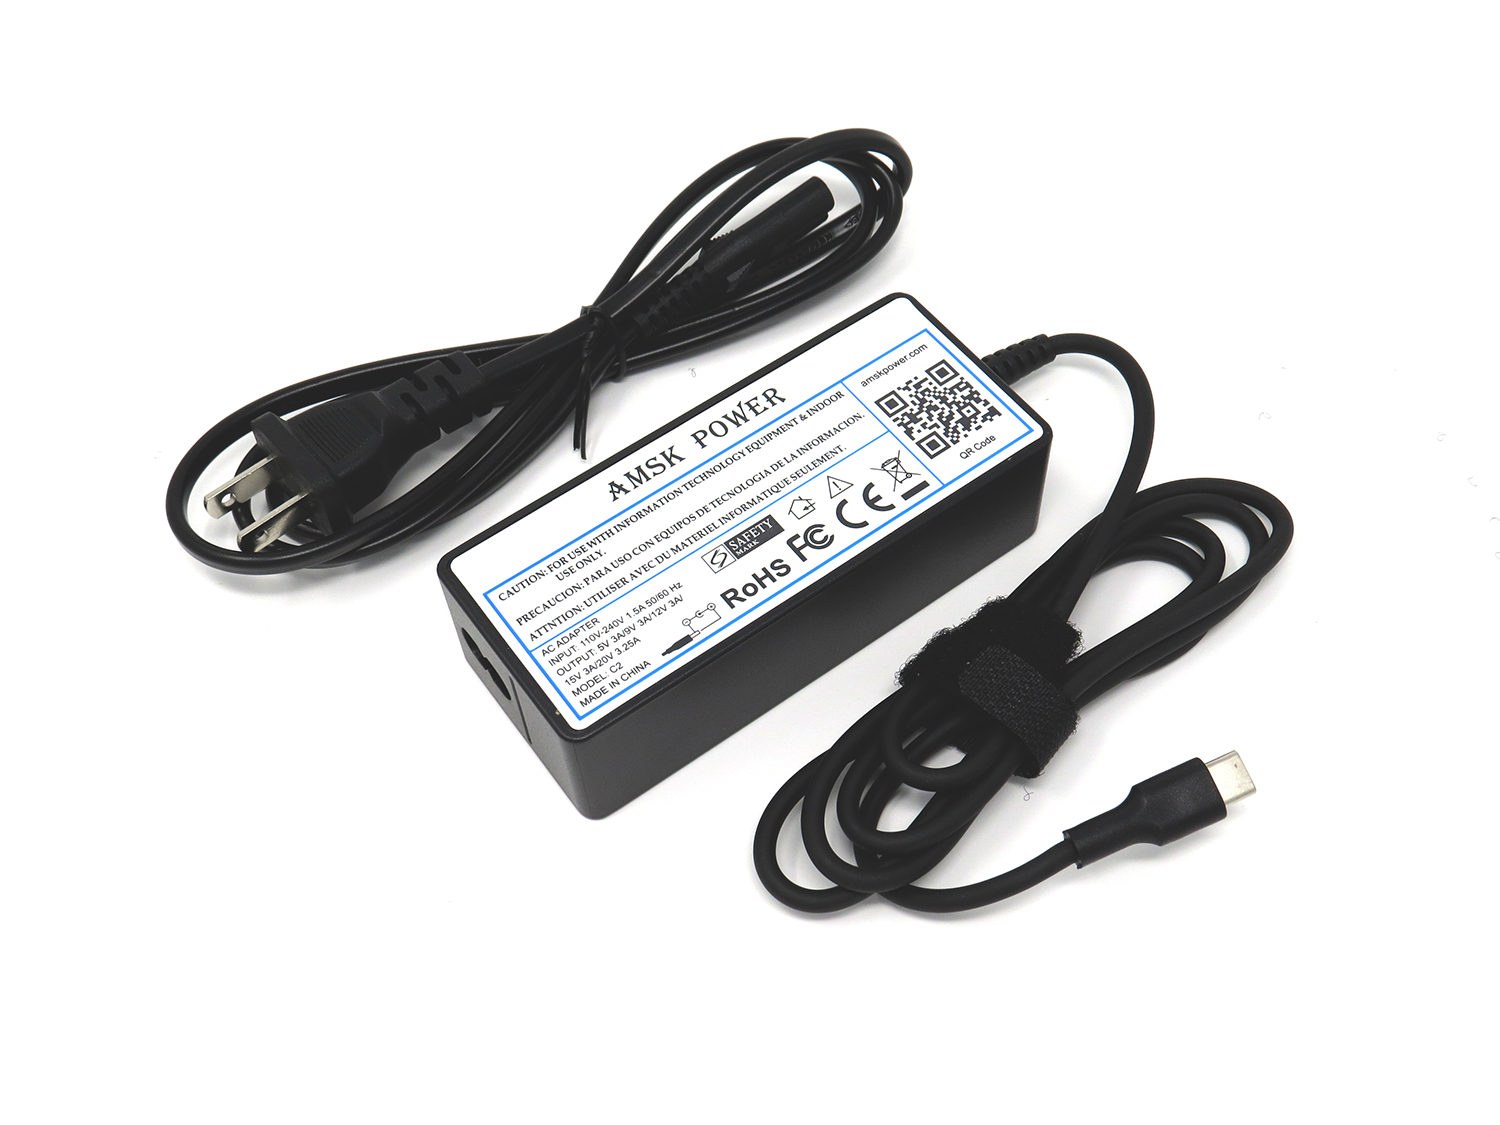 AMSK POWER Ac Adapter 65W Type-C Charger Power Supply For Dell Latitude 5290,T17G002 Laptop - image 1 of 1